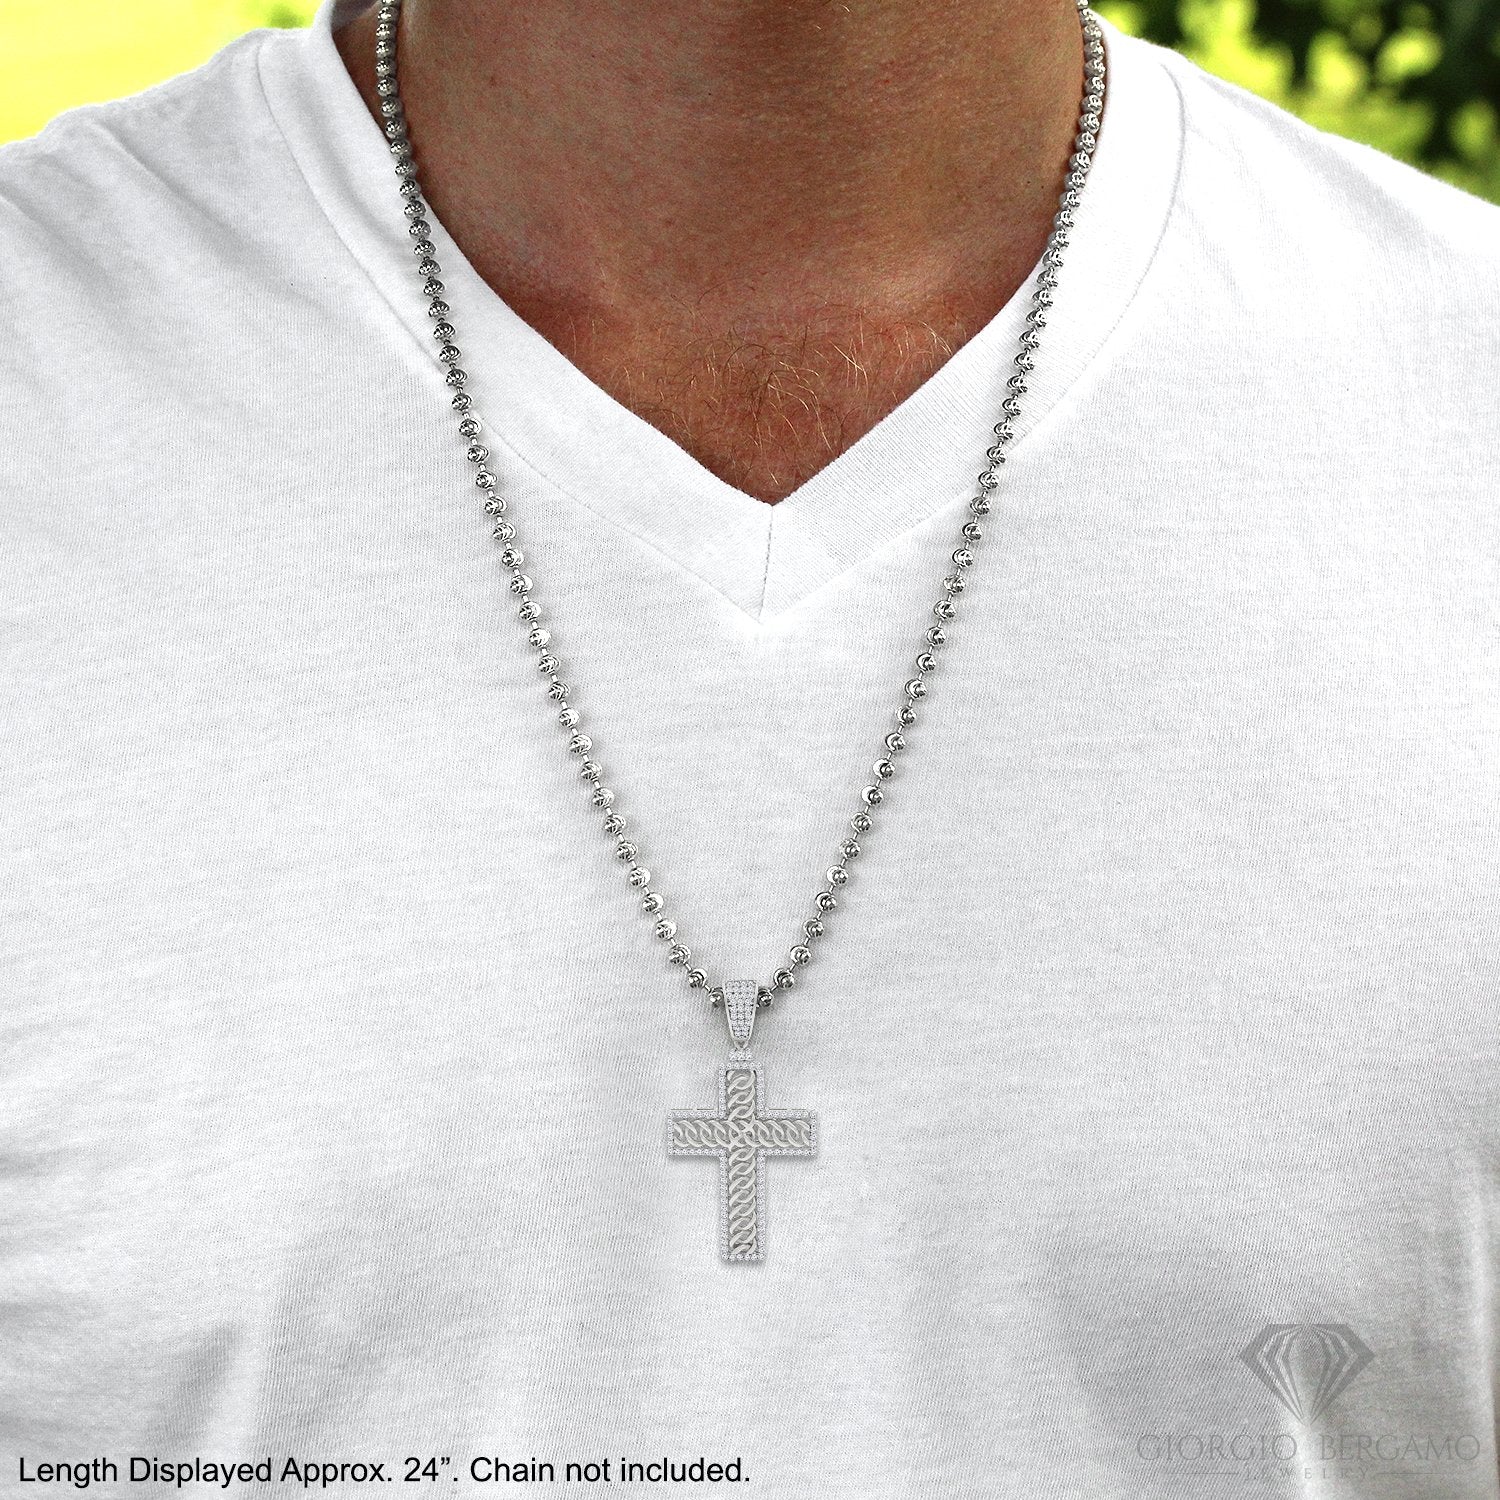 925 Sterling Silver Micro Pave Woven Cross Pendant Only